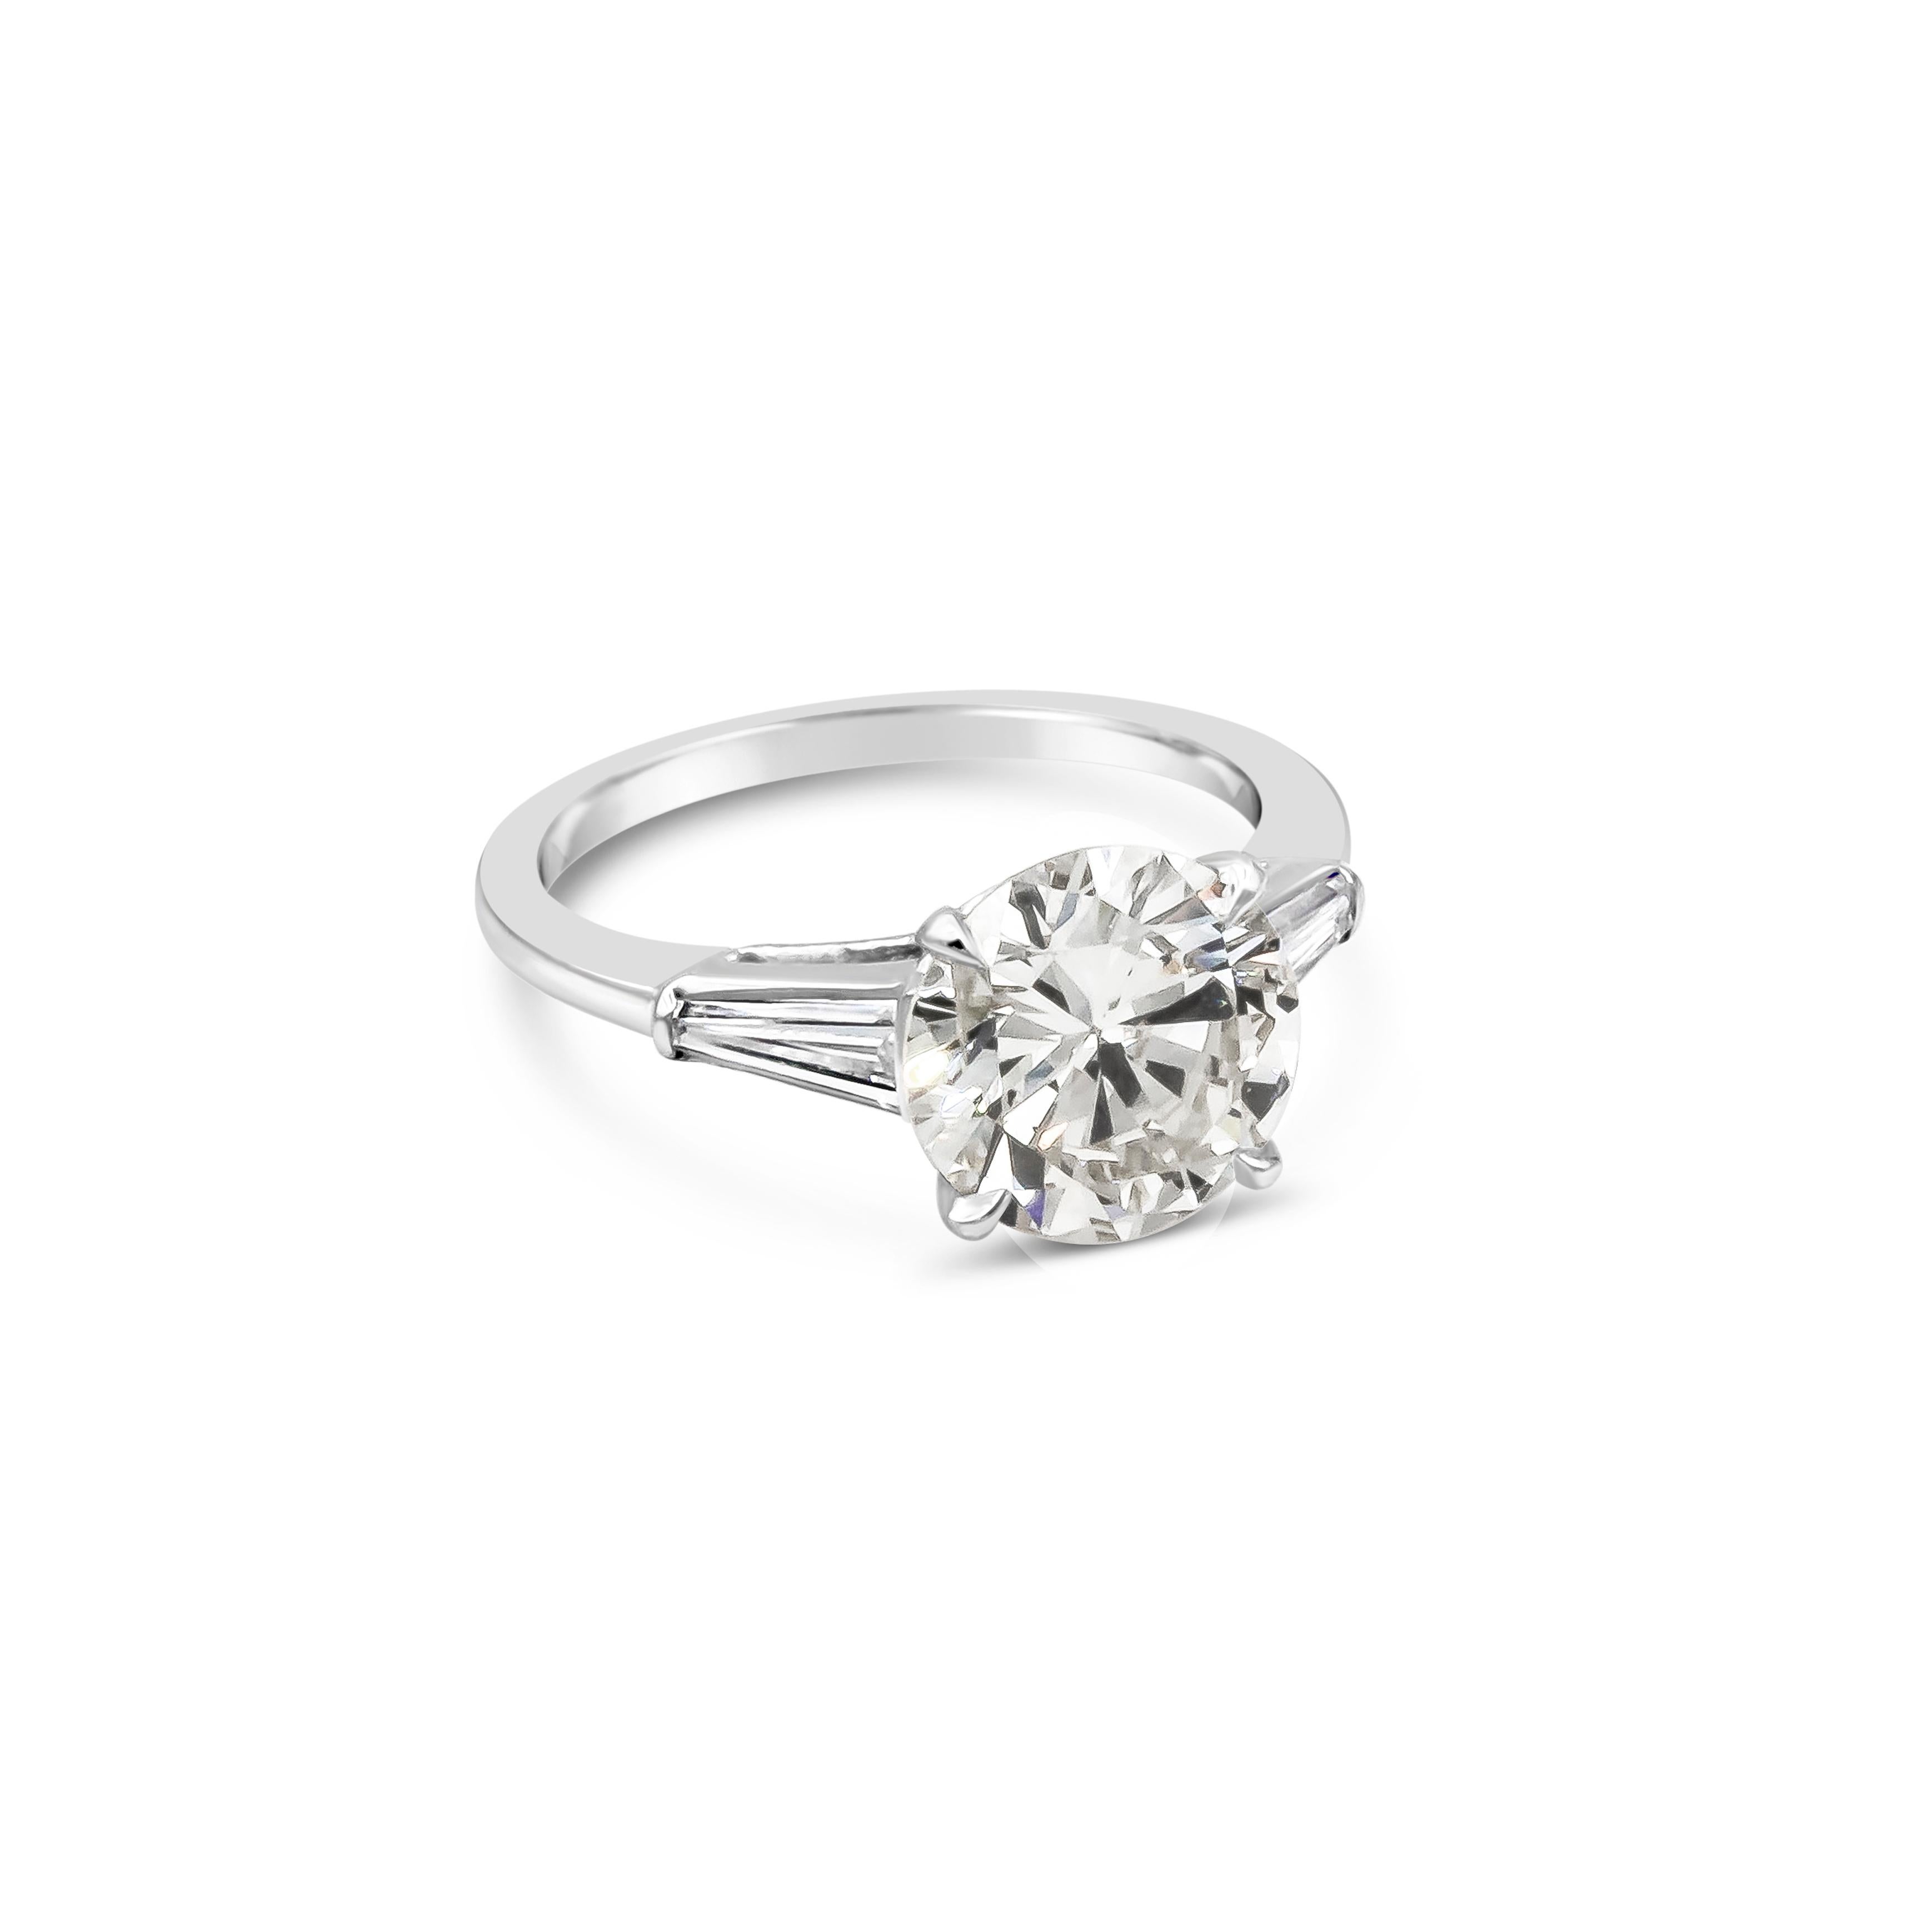 A timeless classic. Tapered baguette diamonds weighing approximately 0.20 carats each, elegantly compliment the gorgeous 2.56 carat diamond center. Set in a polished platinum composition. One of the most popular among the different styles of three